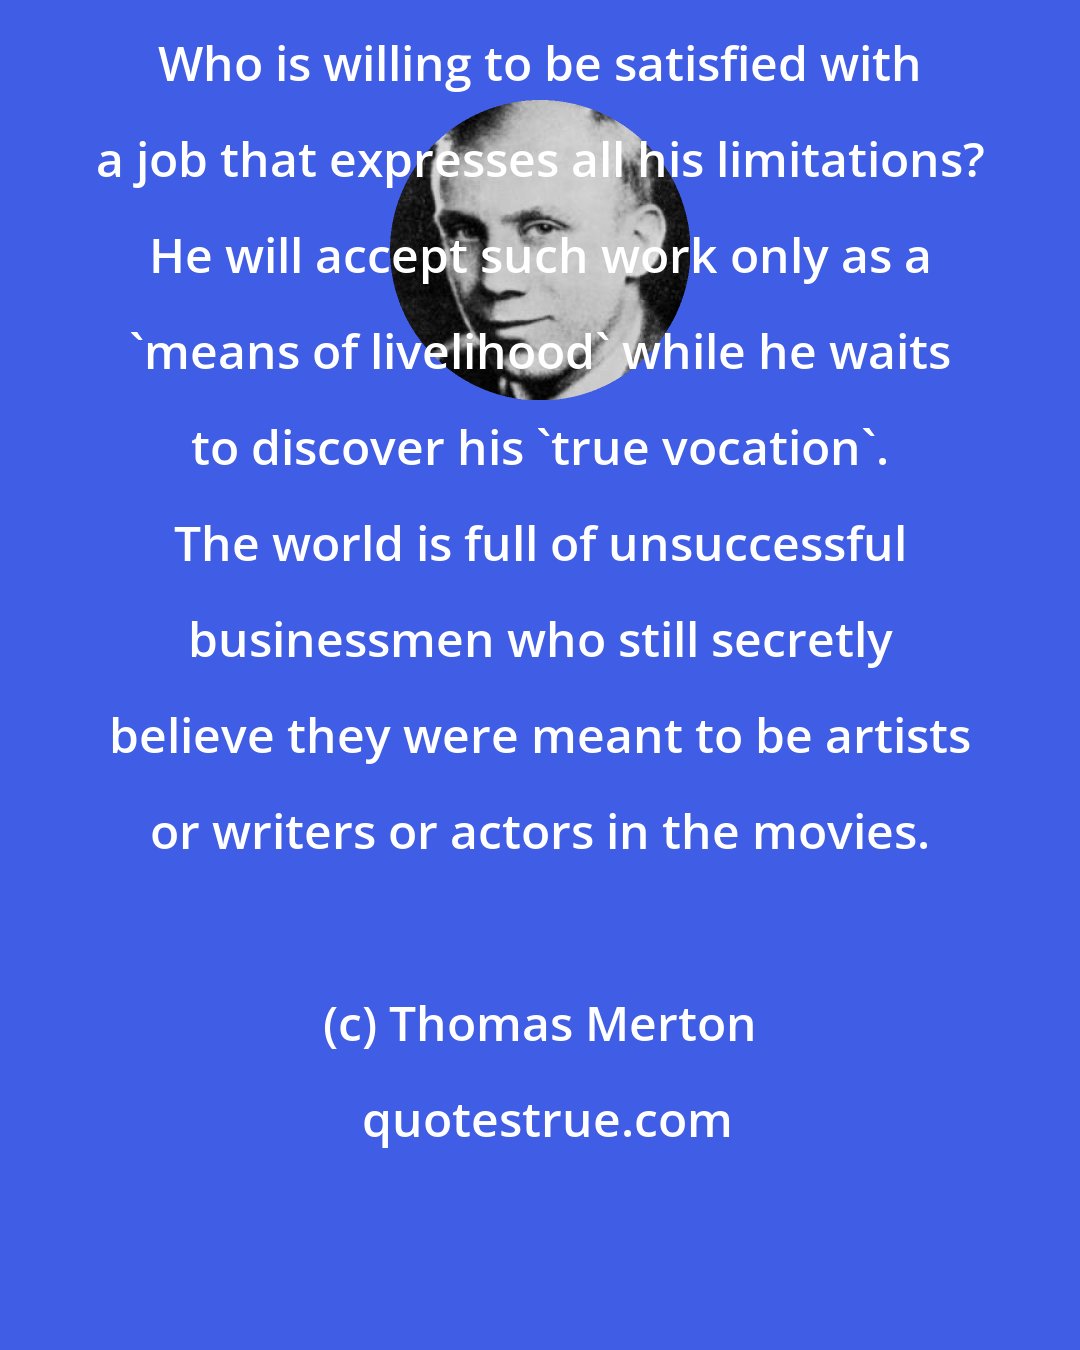 Thomas Merton: Who is willing to be satisfied with a job that expresses all his limitations? He will accept such work only as a 'means of livelihood' while he waits to discover his 'true vocation'. The world is full of unsuccessful businessmen who still secretly believe they were meant to be artists or writers or actors in the movies.